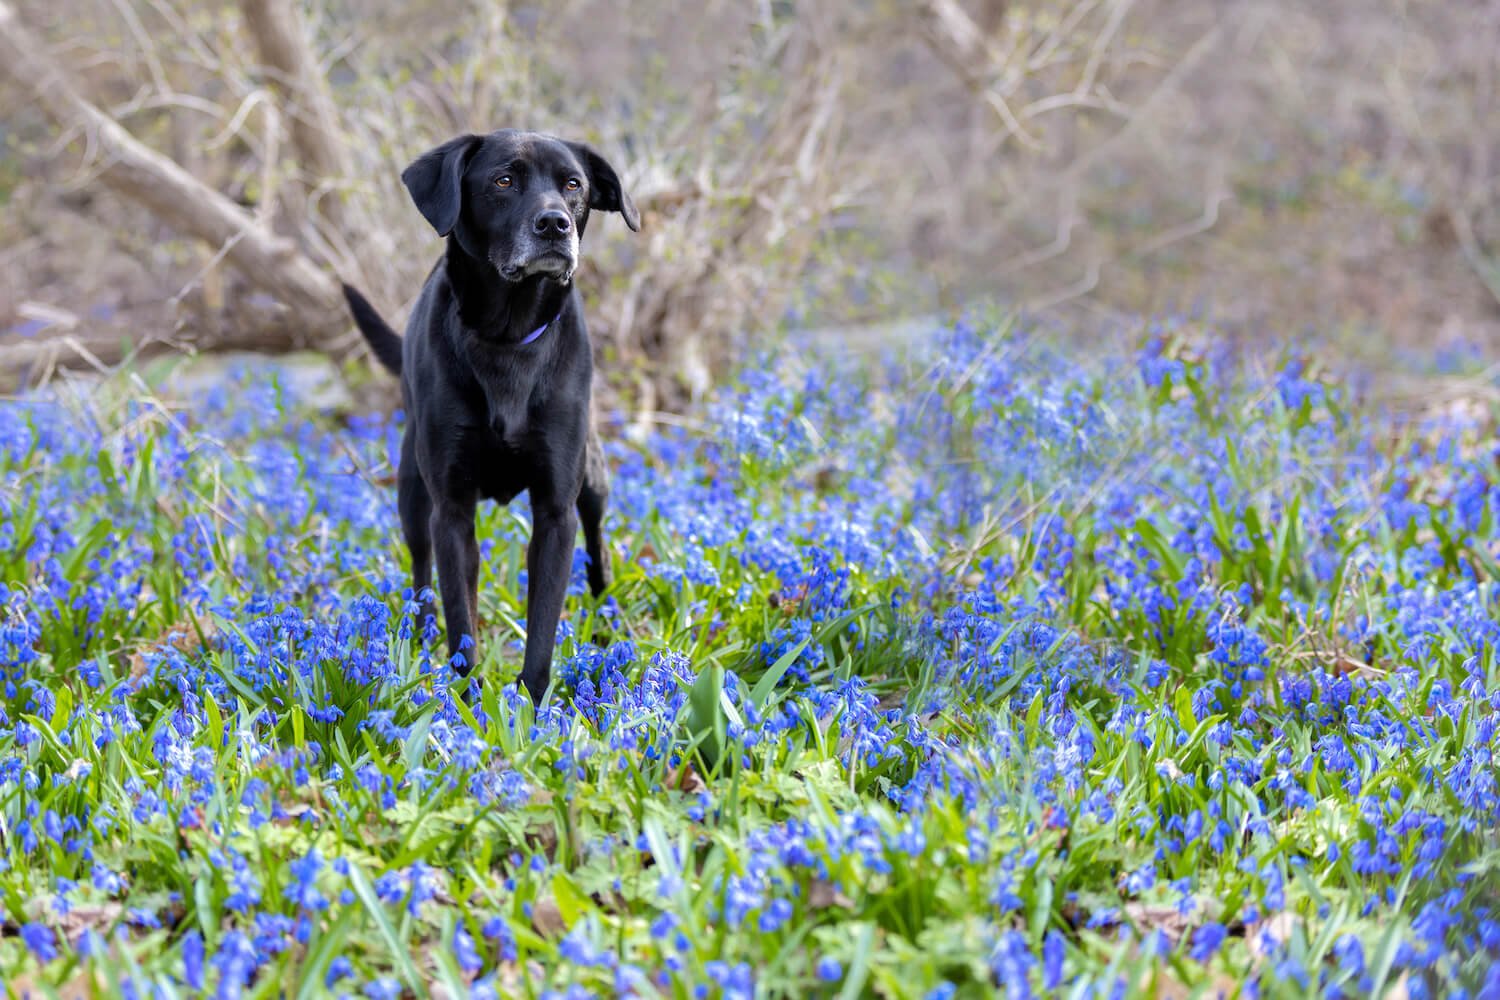 Dodger in the bluebell patch